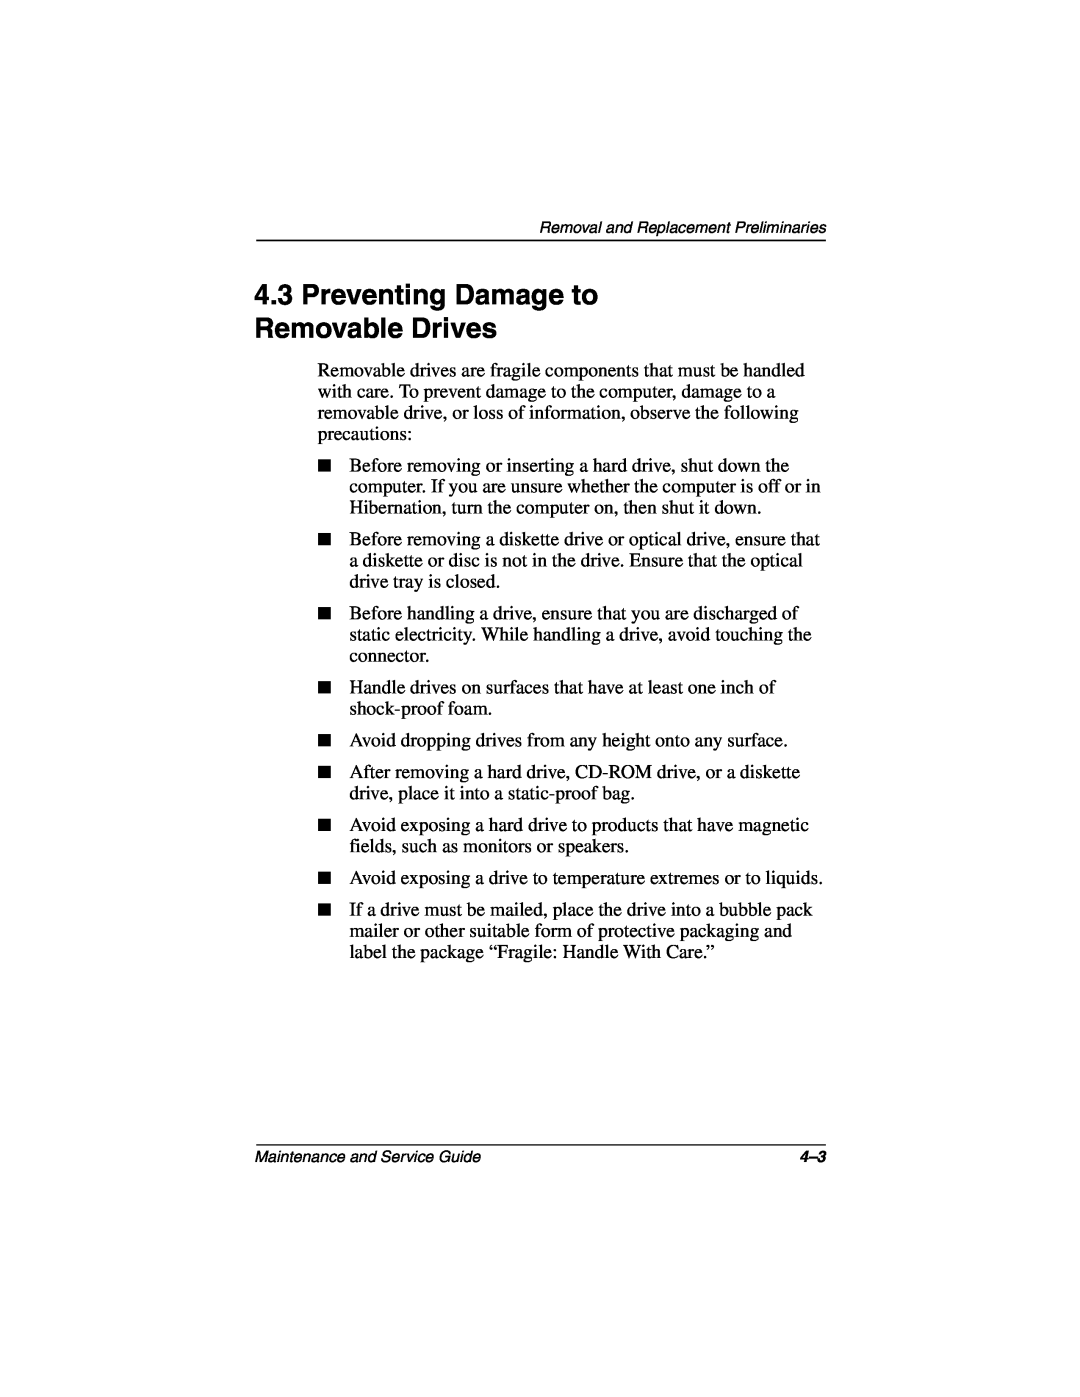 Compaq N160 manual Preventing Damage to Removable Drives 